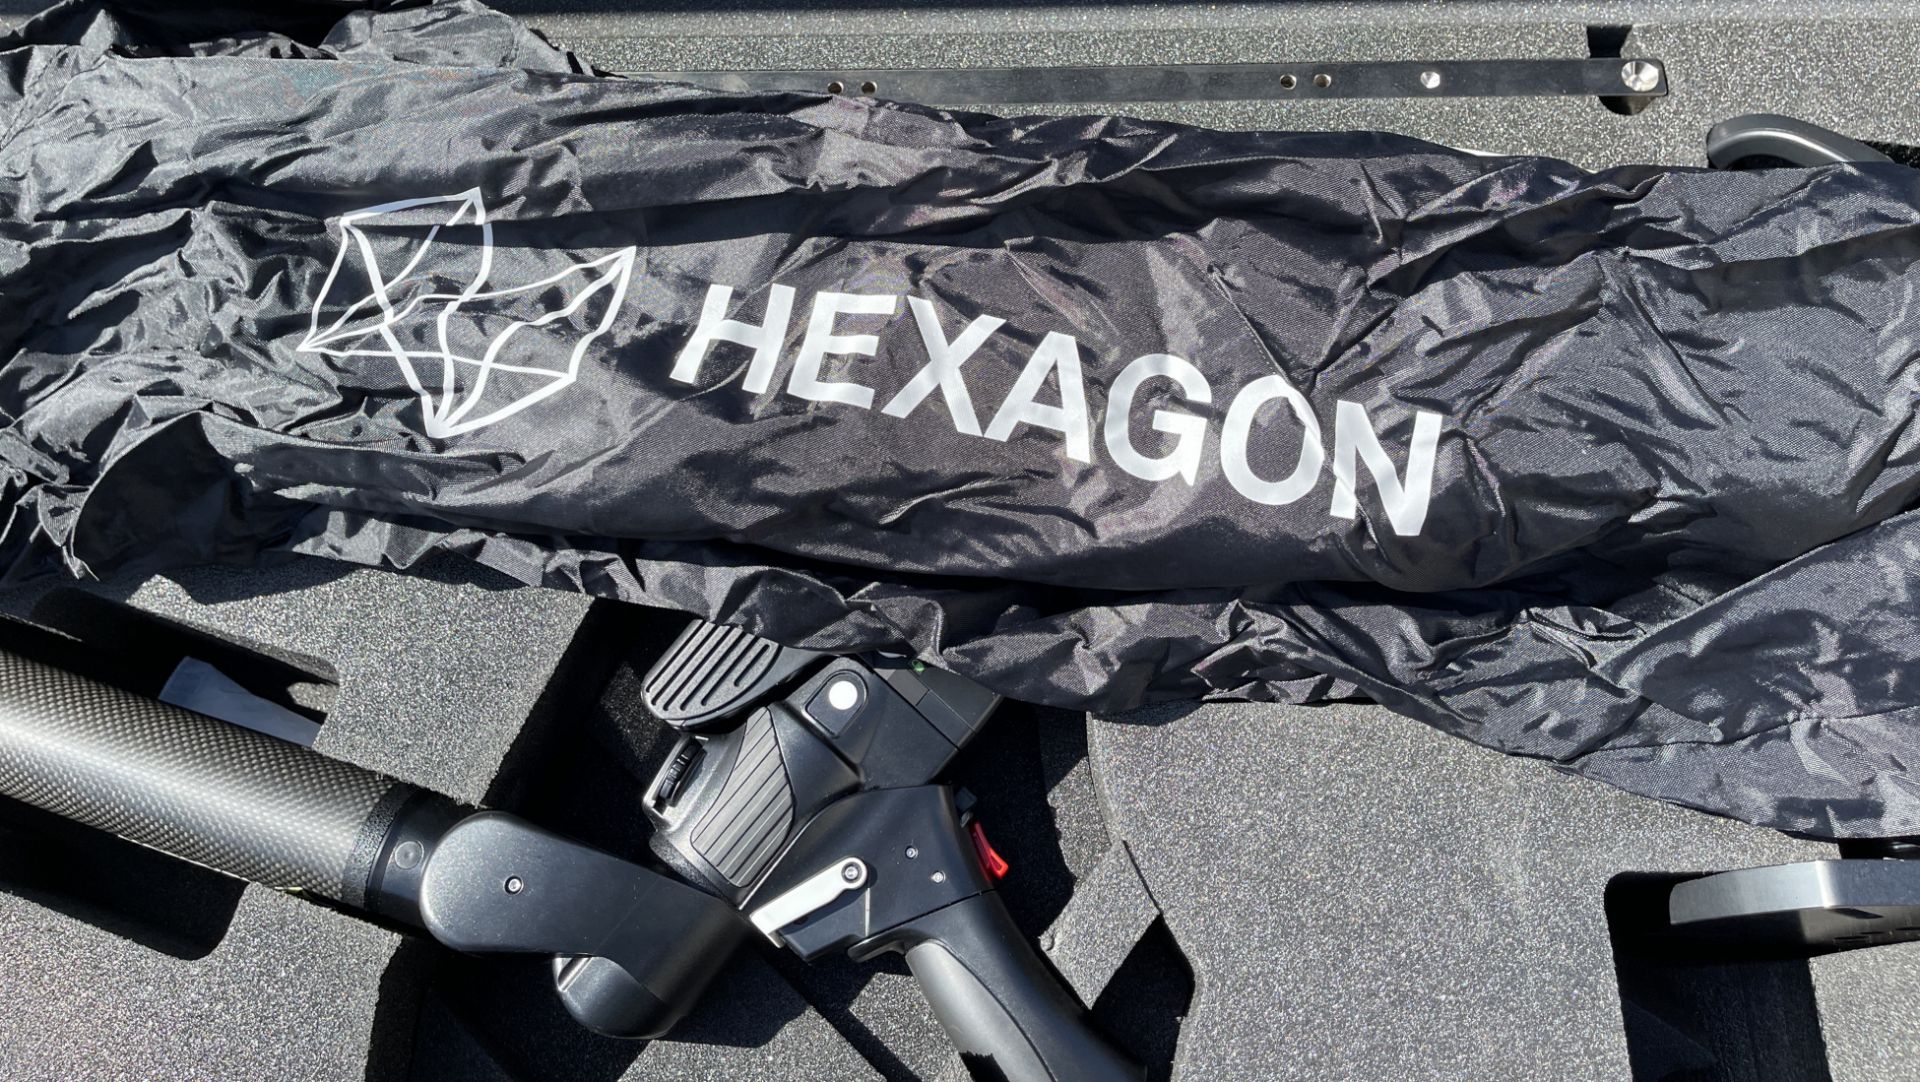 Hexagon Absolute Arm, 8535, 7 Axis - Image 26 of 75